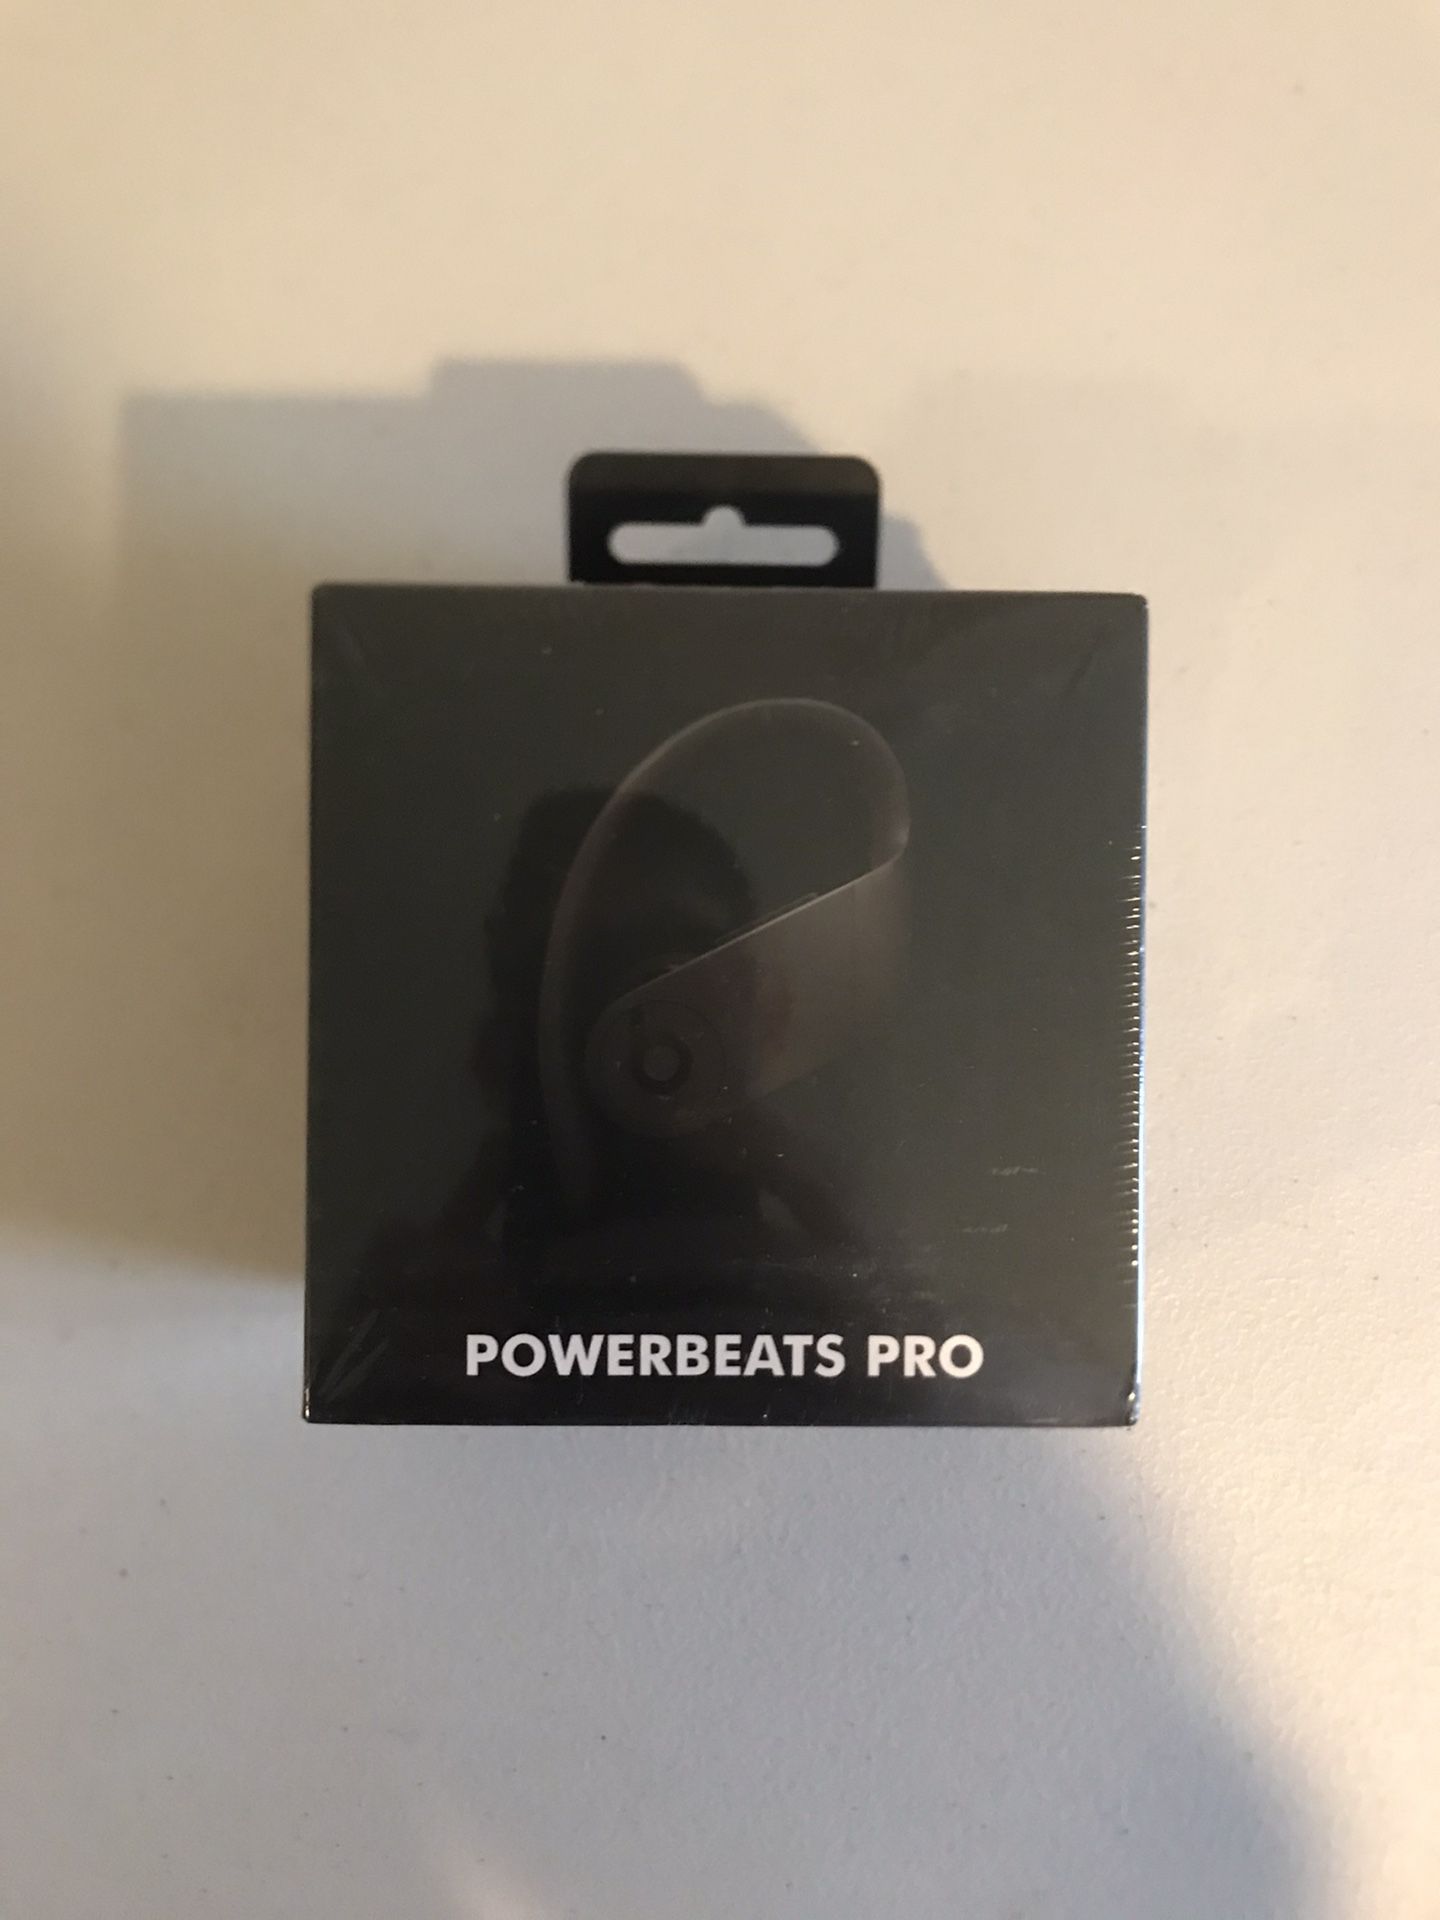 Power beats pro by Dr. Dre SAME DAY SHIPPING